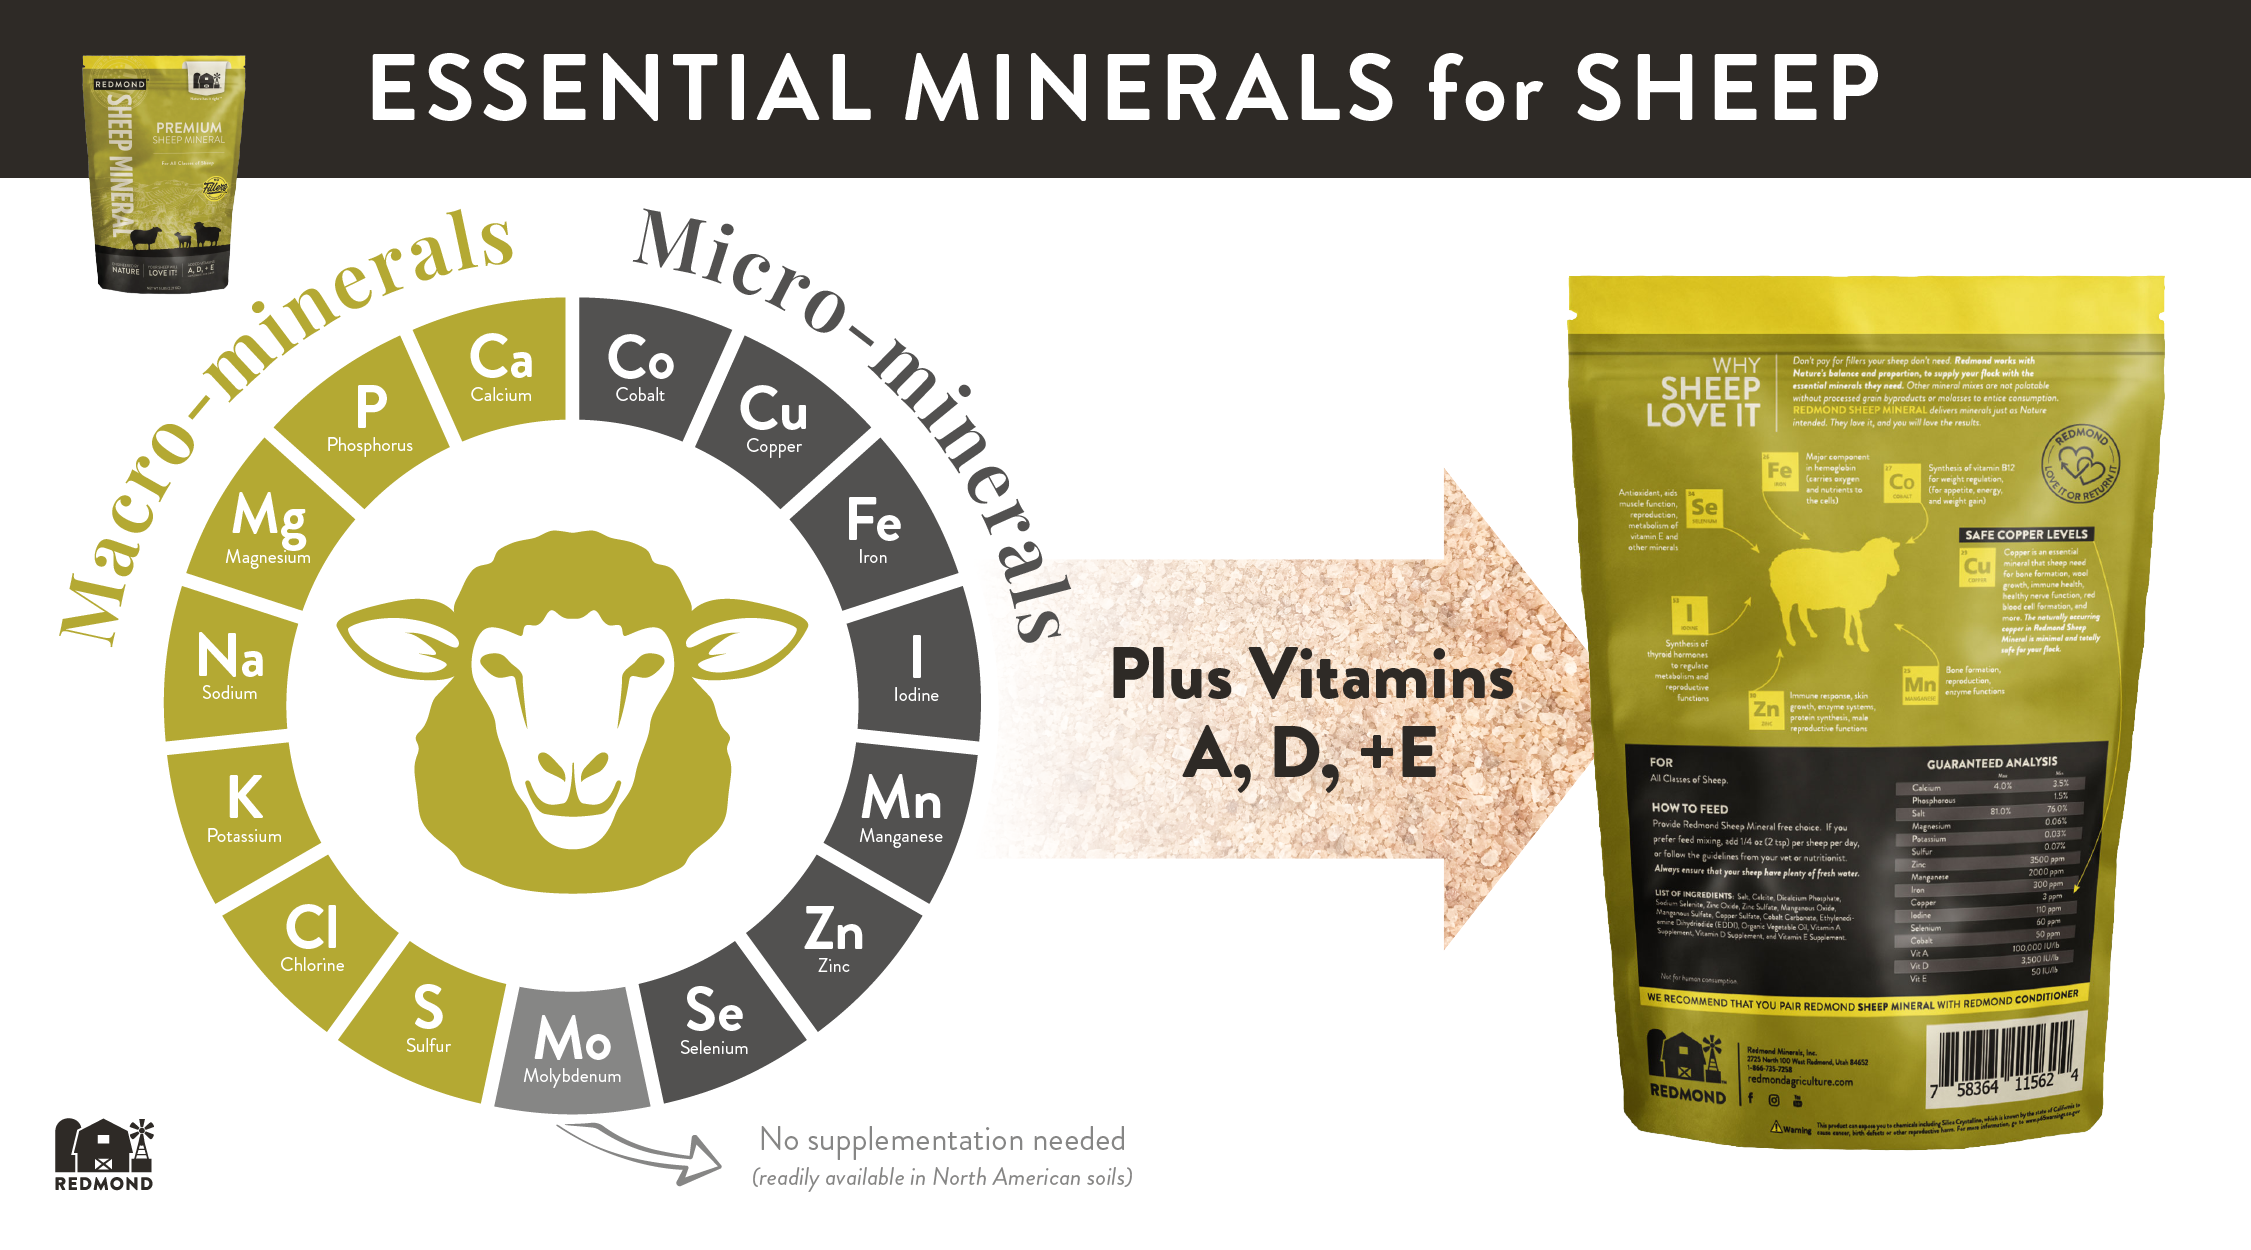 Essential minerals for sheep